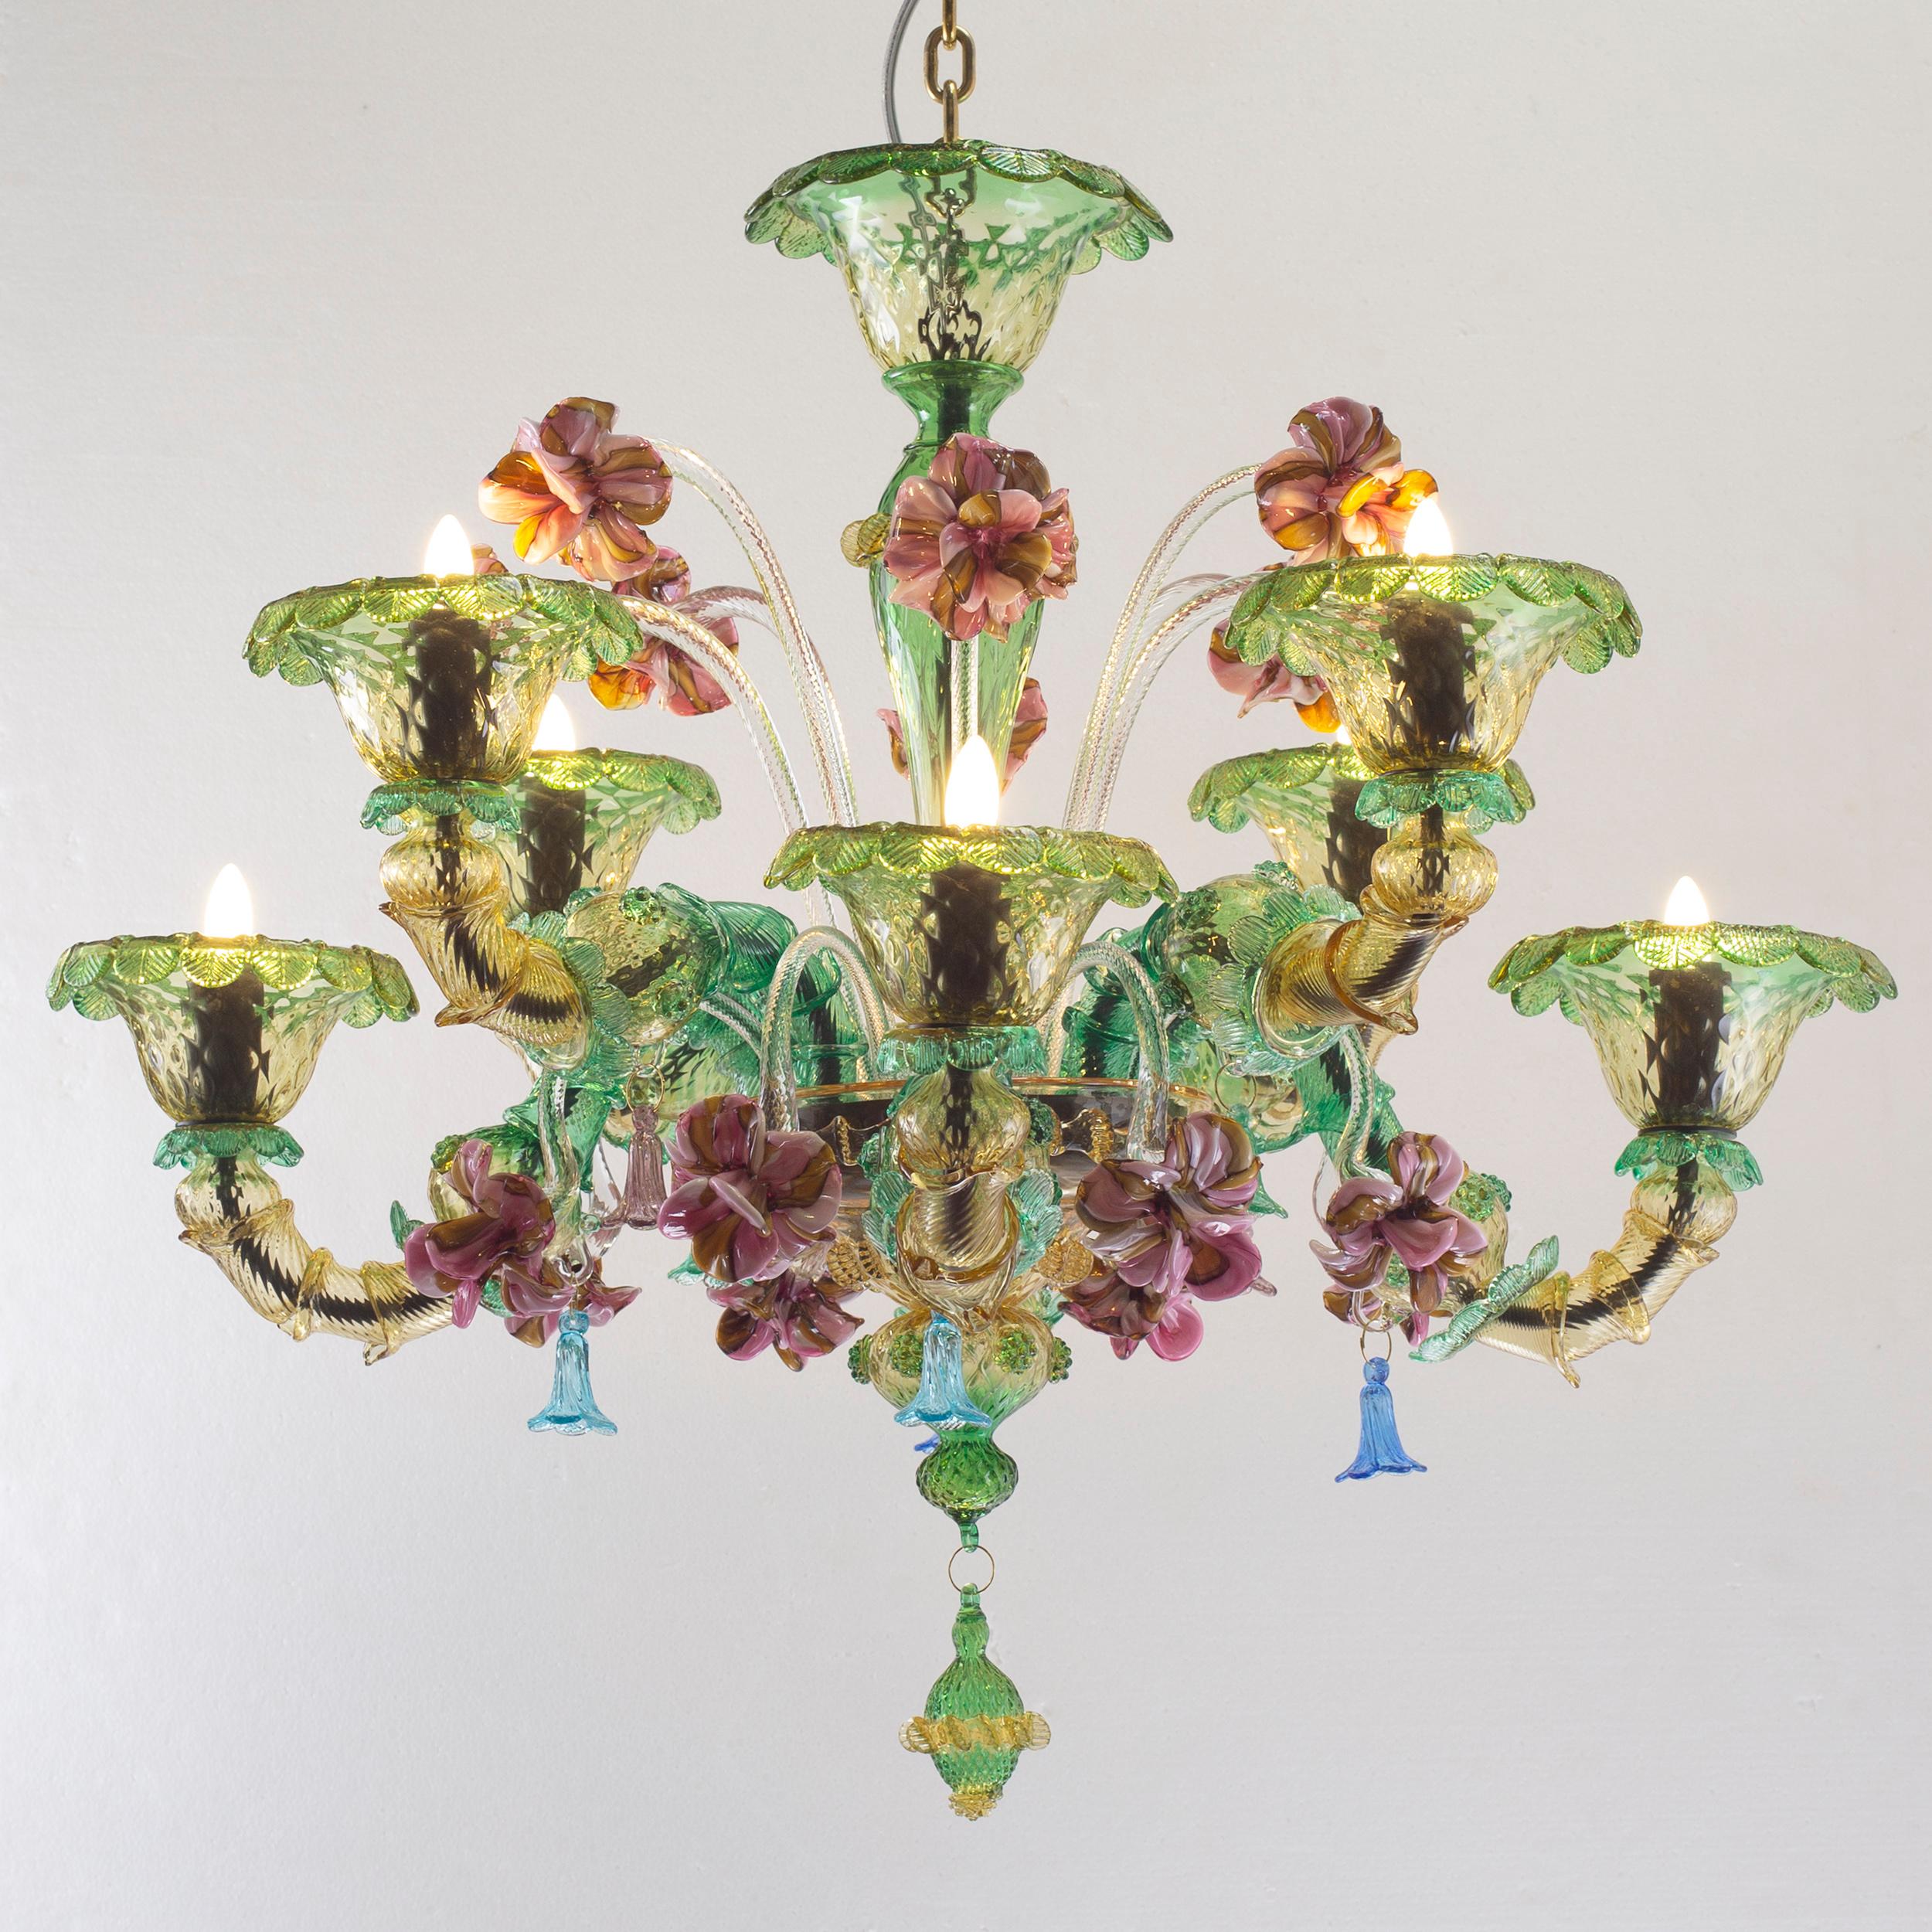 Semi Rezzonico chandelier 8 arms, on 2 levels in amber and green Murano glass multicolor flowers in vitreous paste by Multiforme
This is an artistic model manufactured by our skilled masters glass-worker.
The Murano glass manufacturing techniques